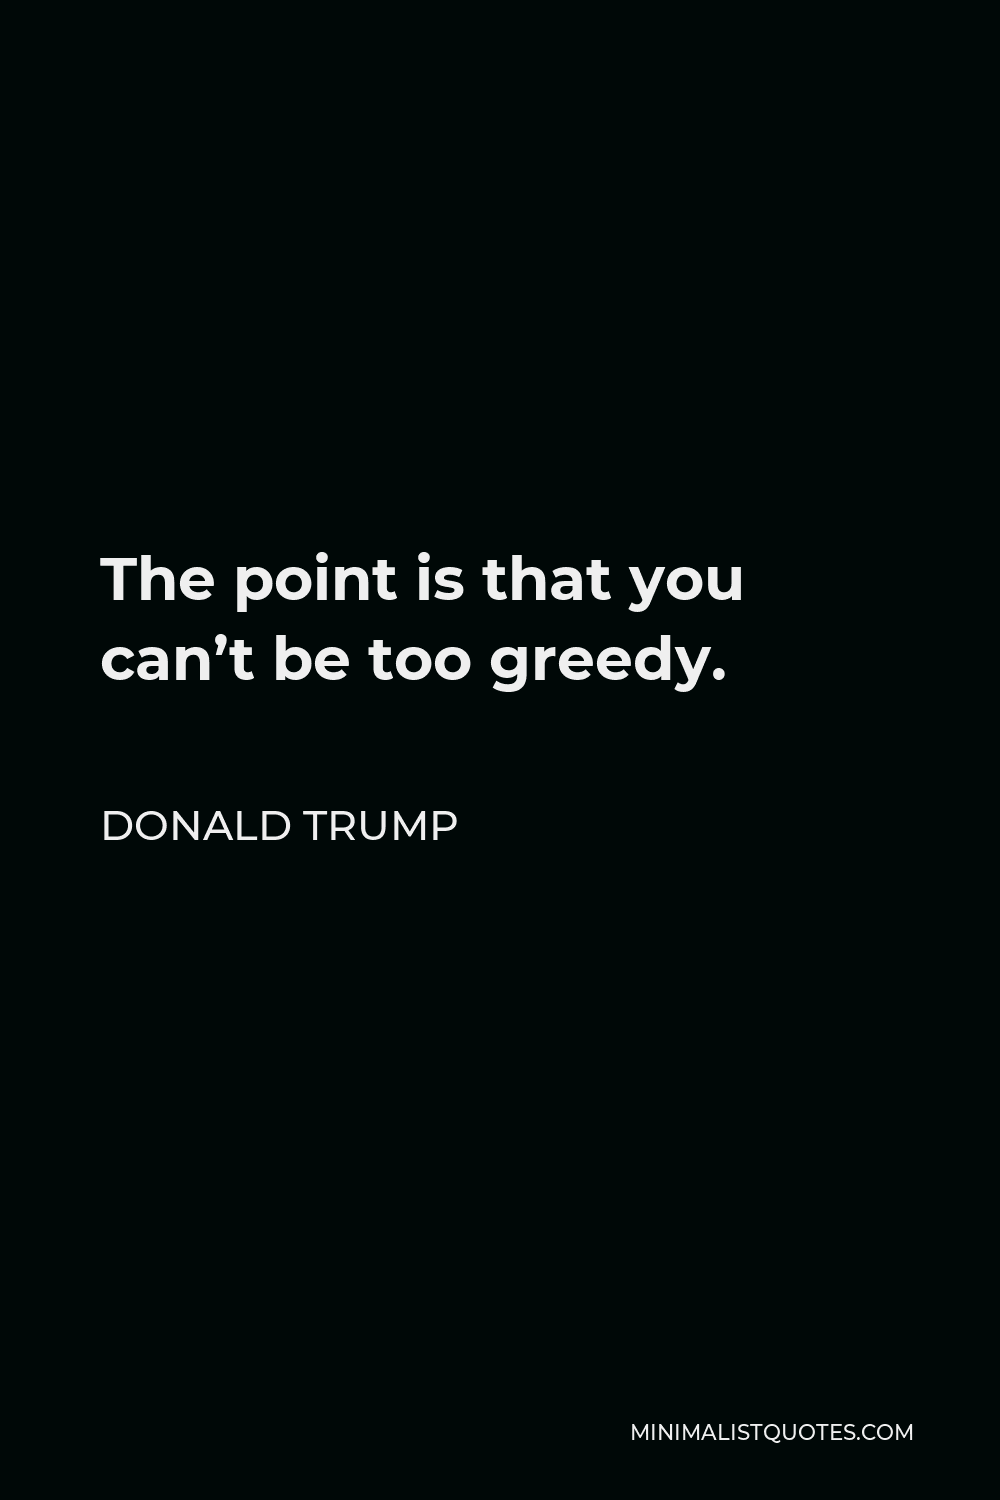 Donald Trump Quote - The point is that you can’t be too greedy.